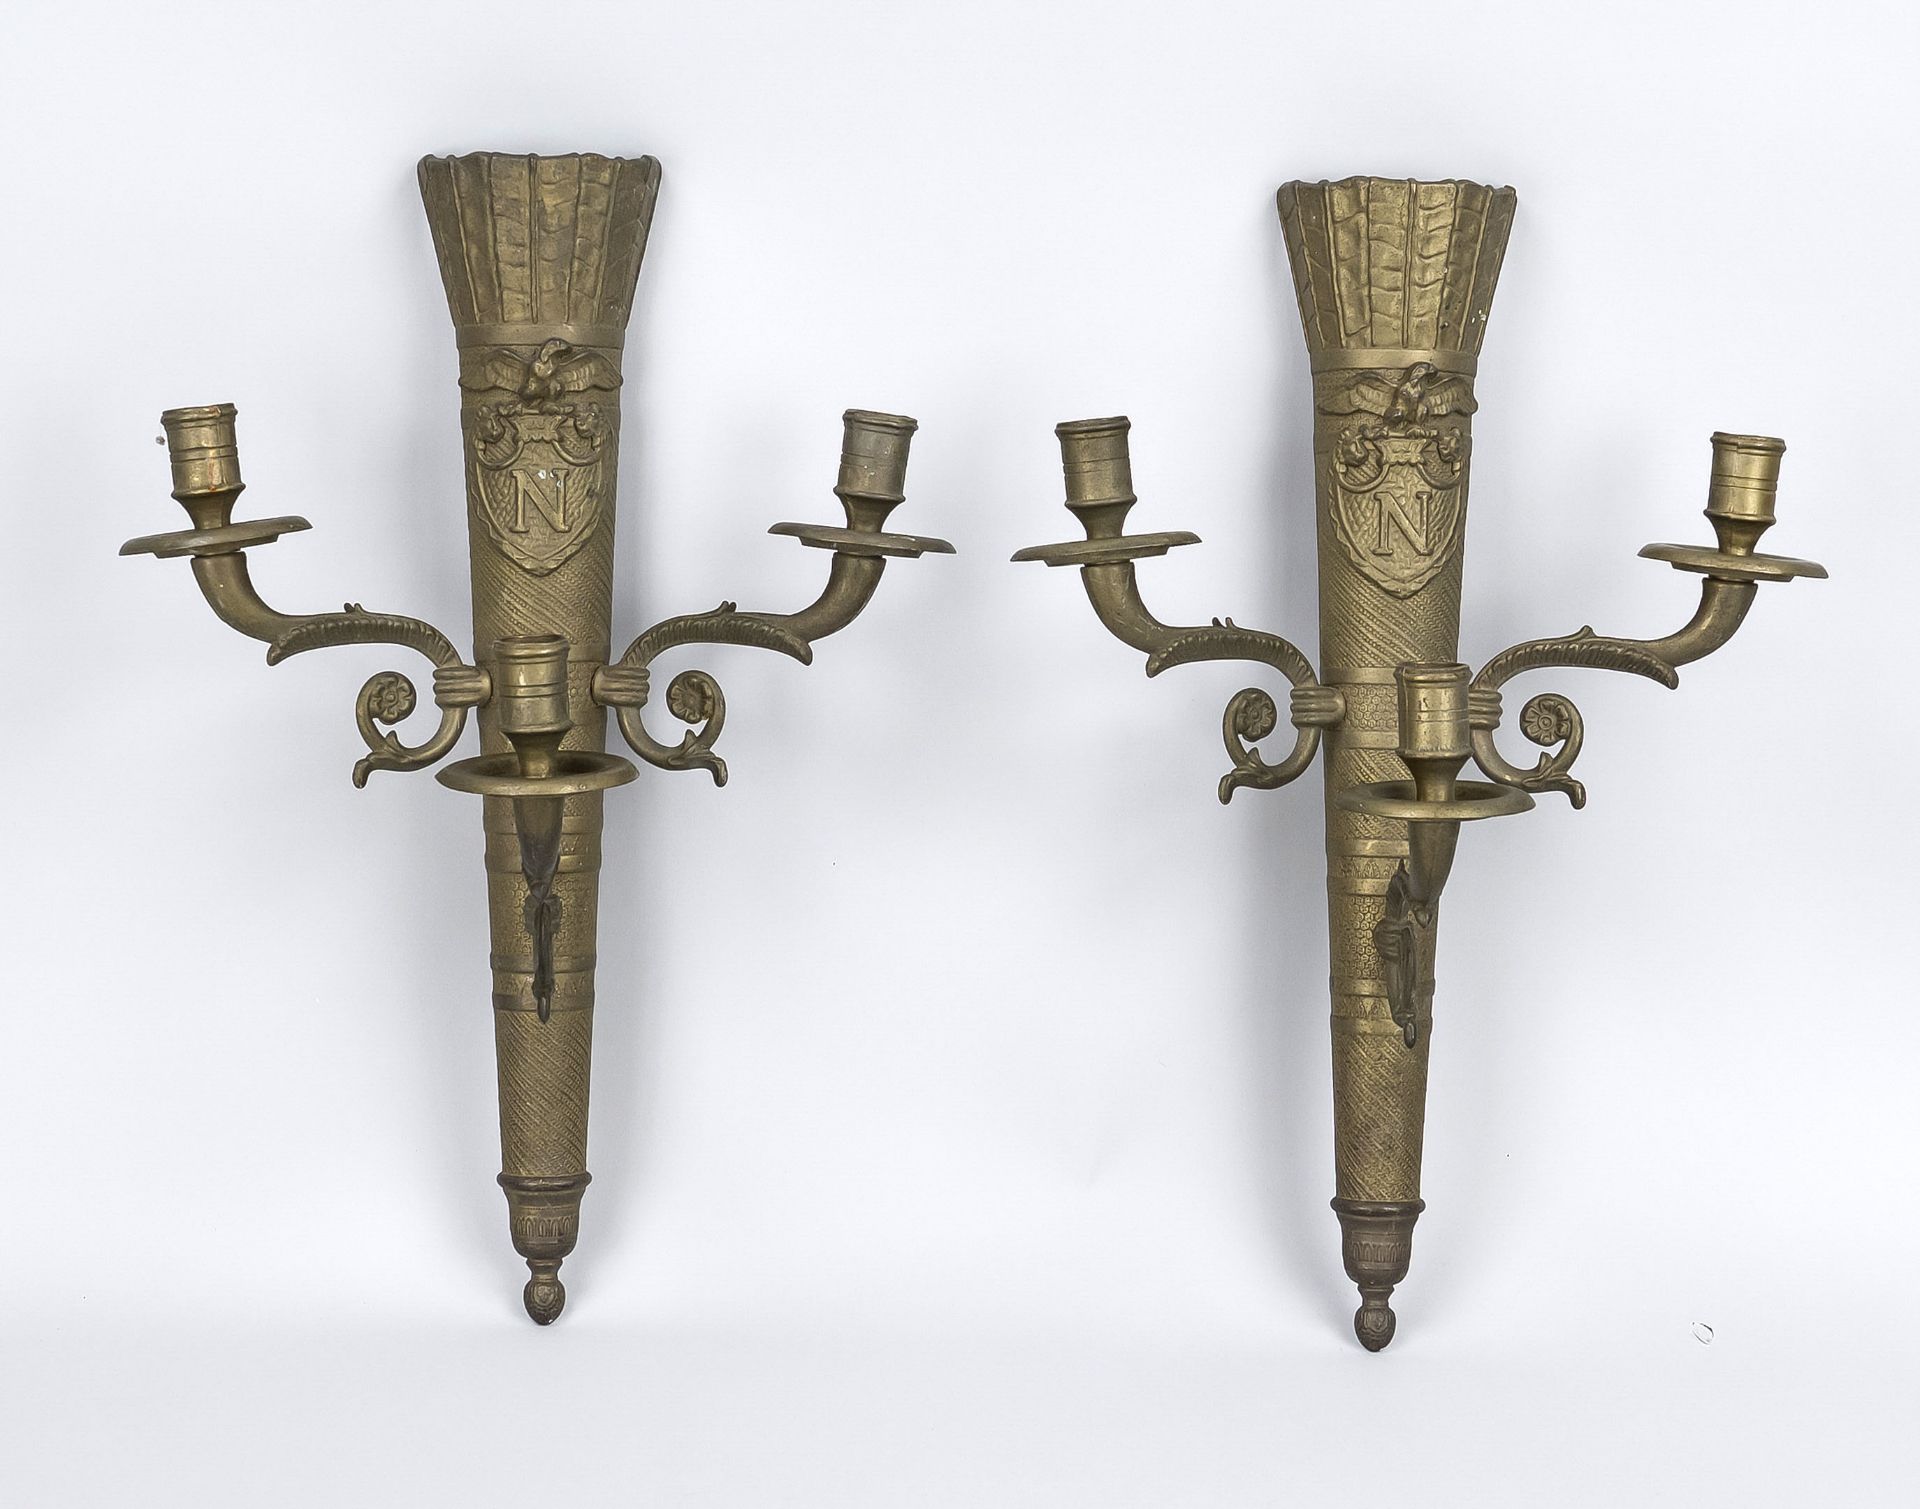 Pair of Napoleon torch lamps, 20th century, bronze, three candle holders, applied Napoleon coat of